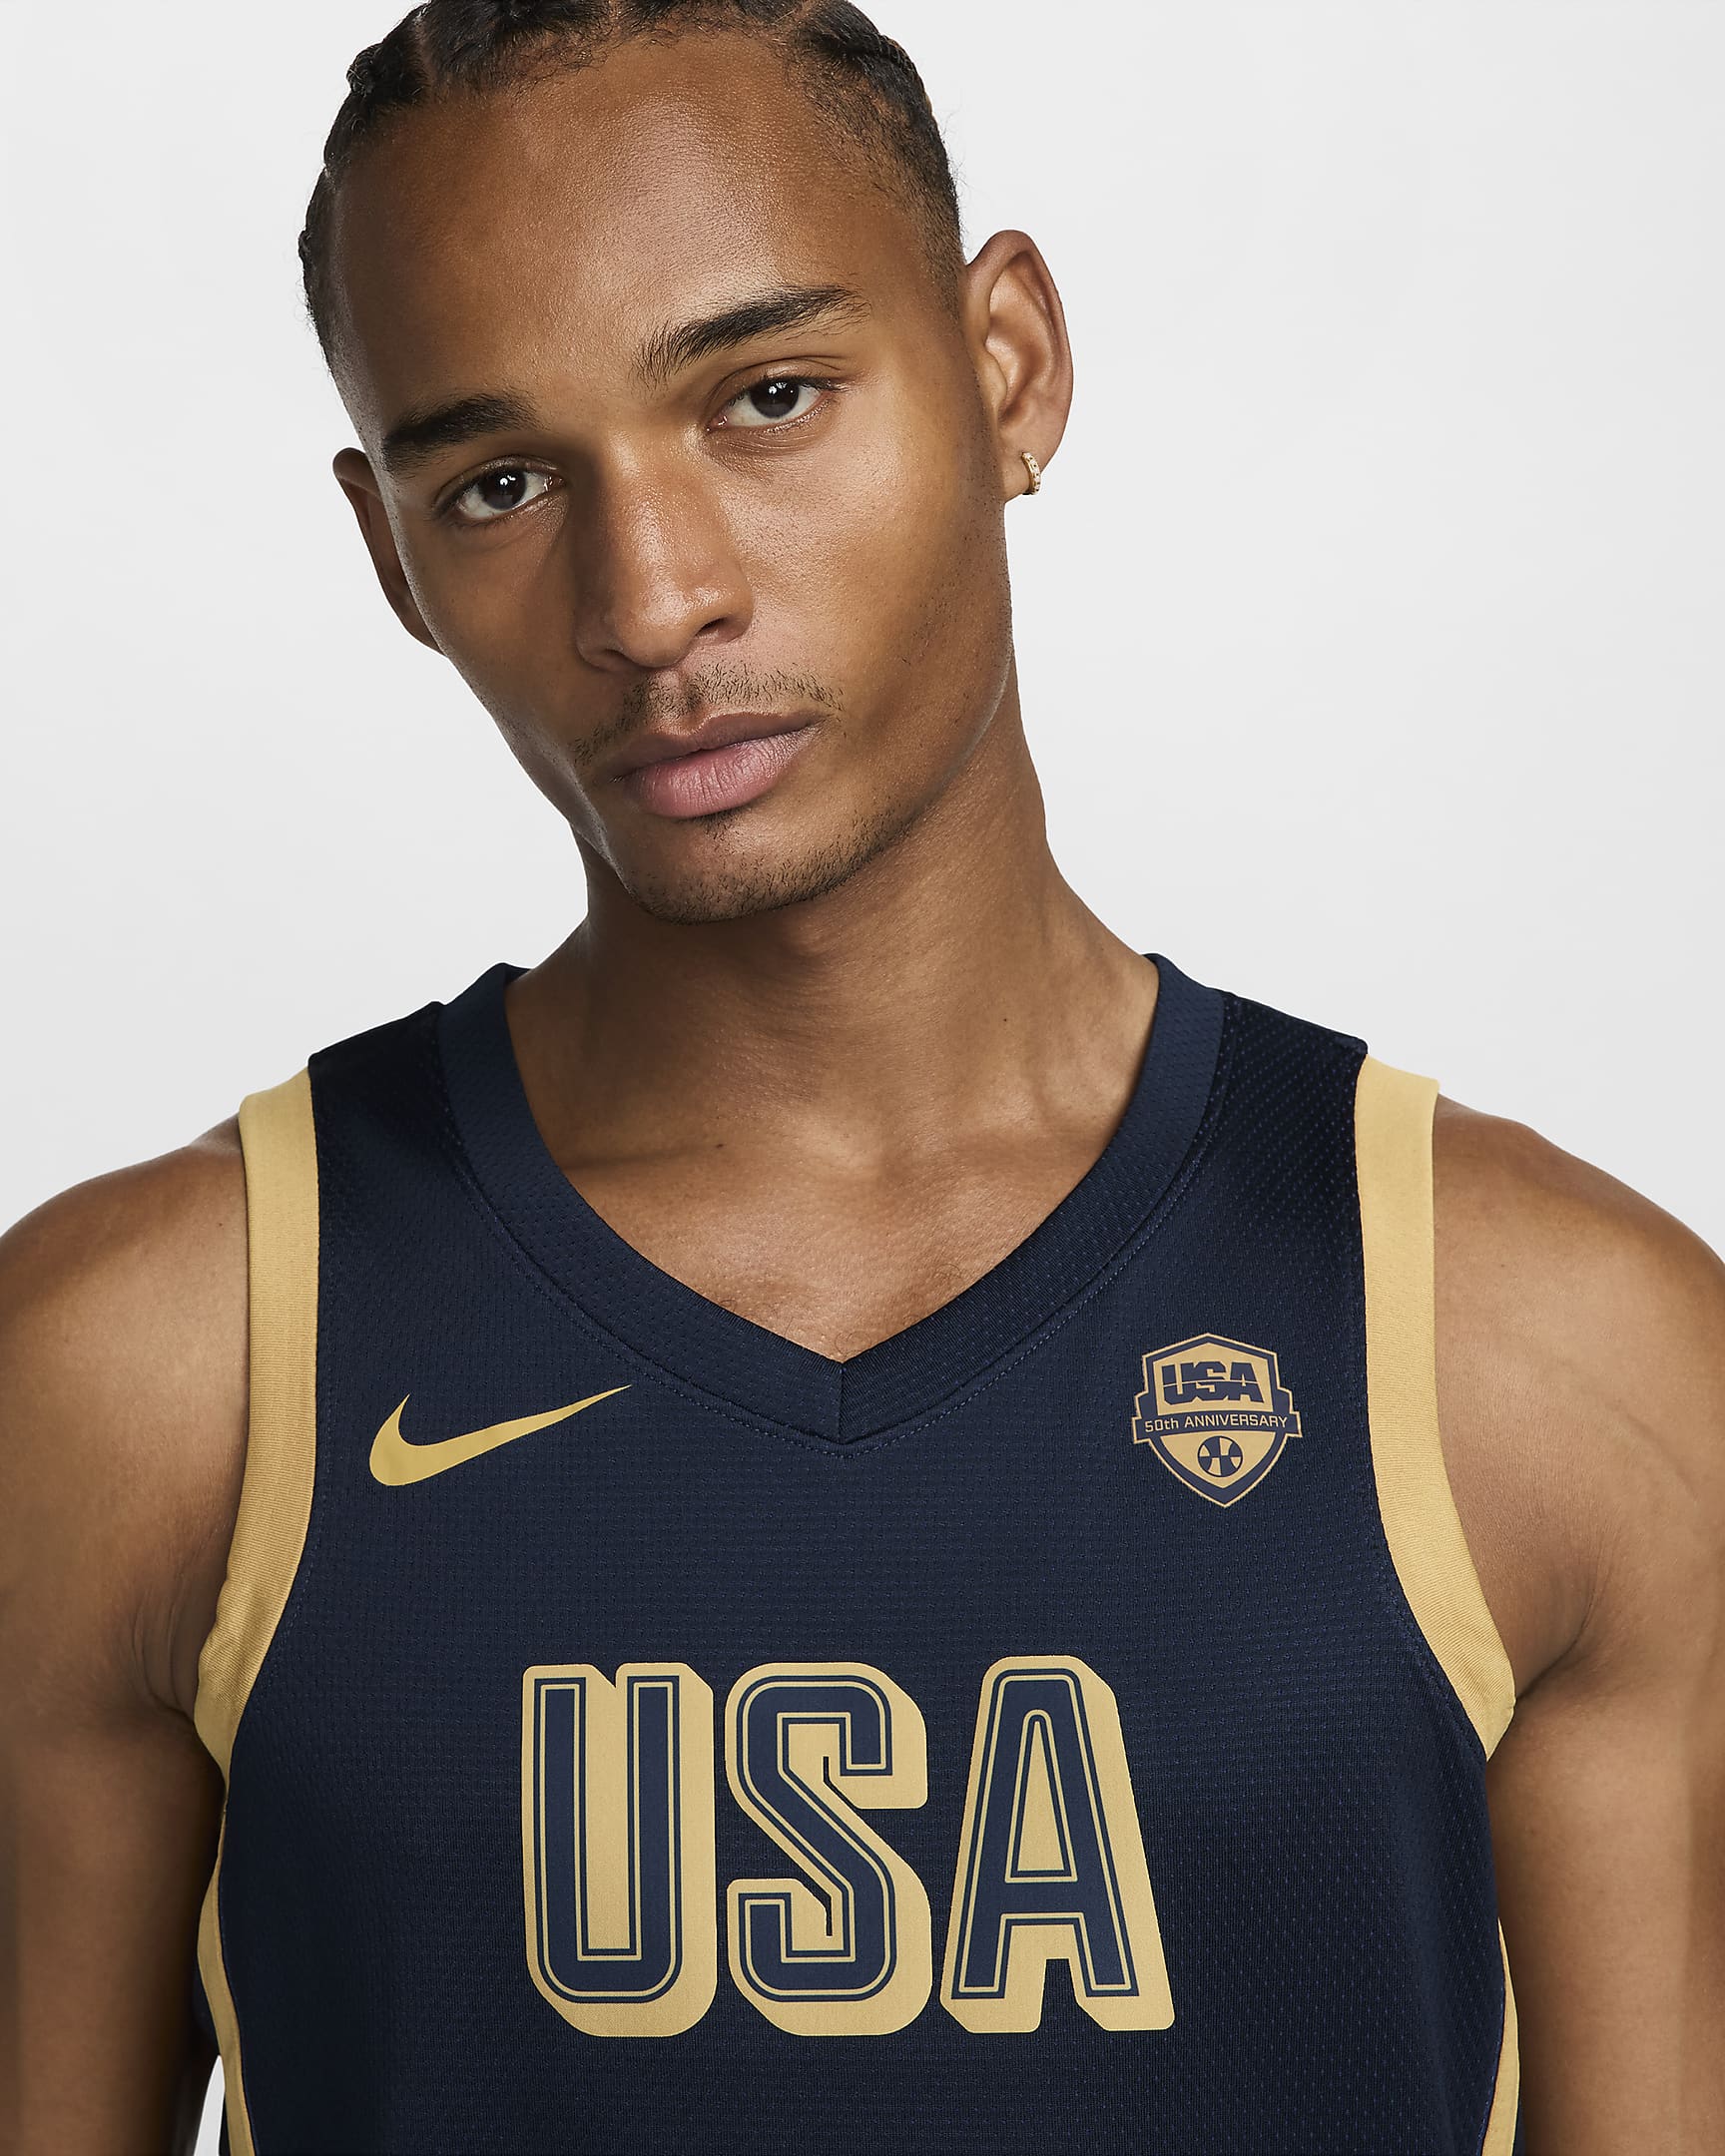 USAB Limited Camiseta Nike Basketball Replica - Hombre - Obsidian/Truly Gold